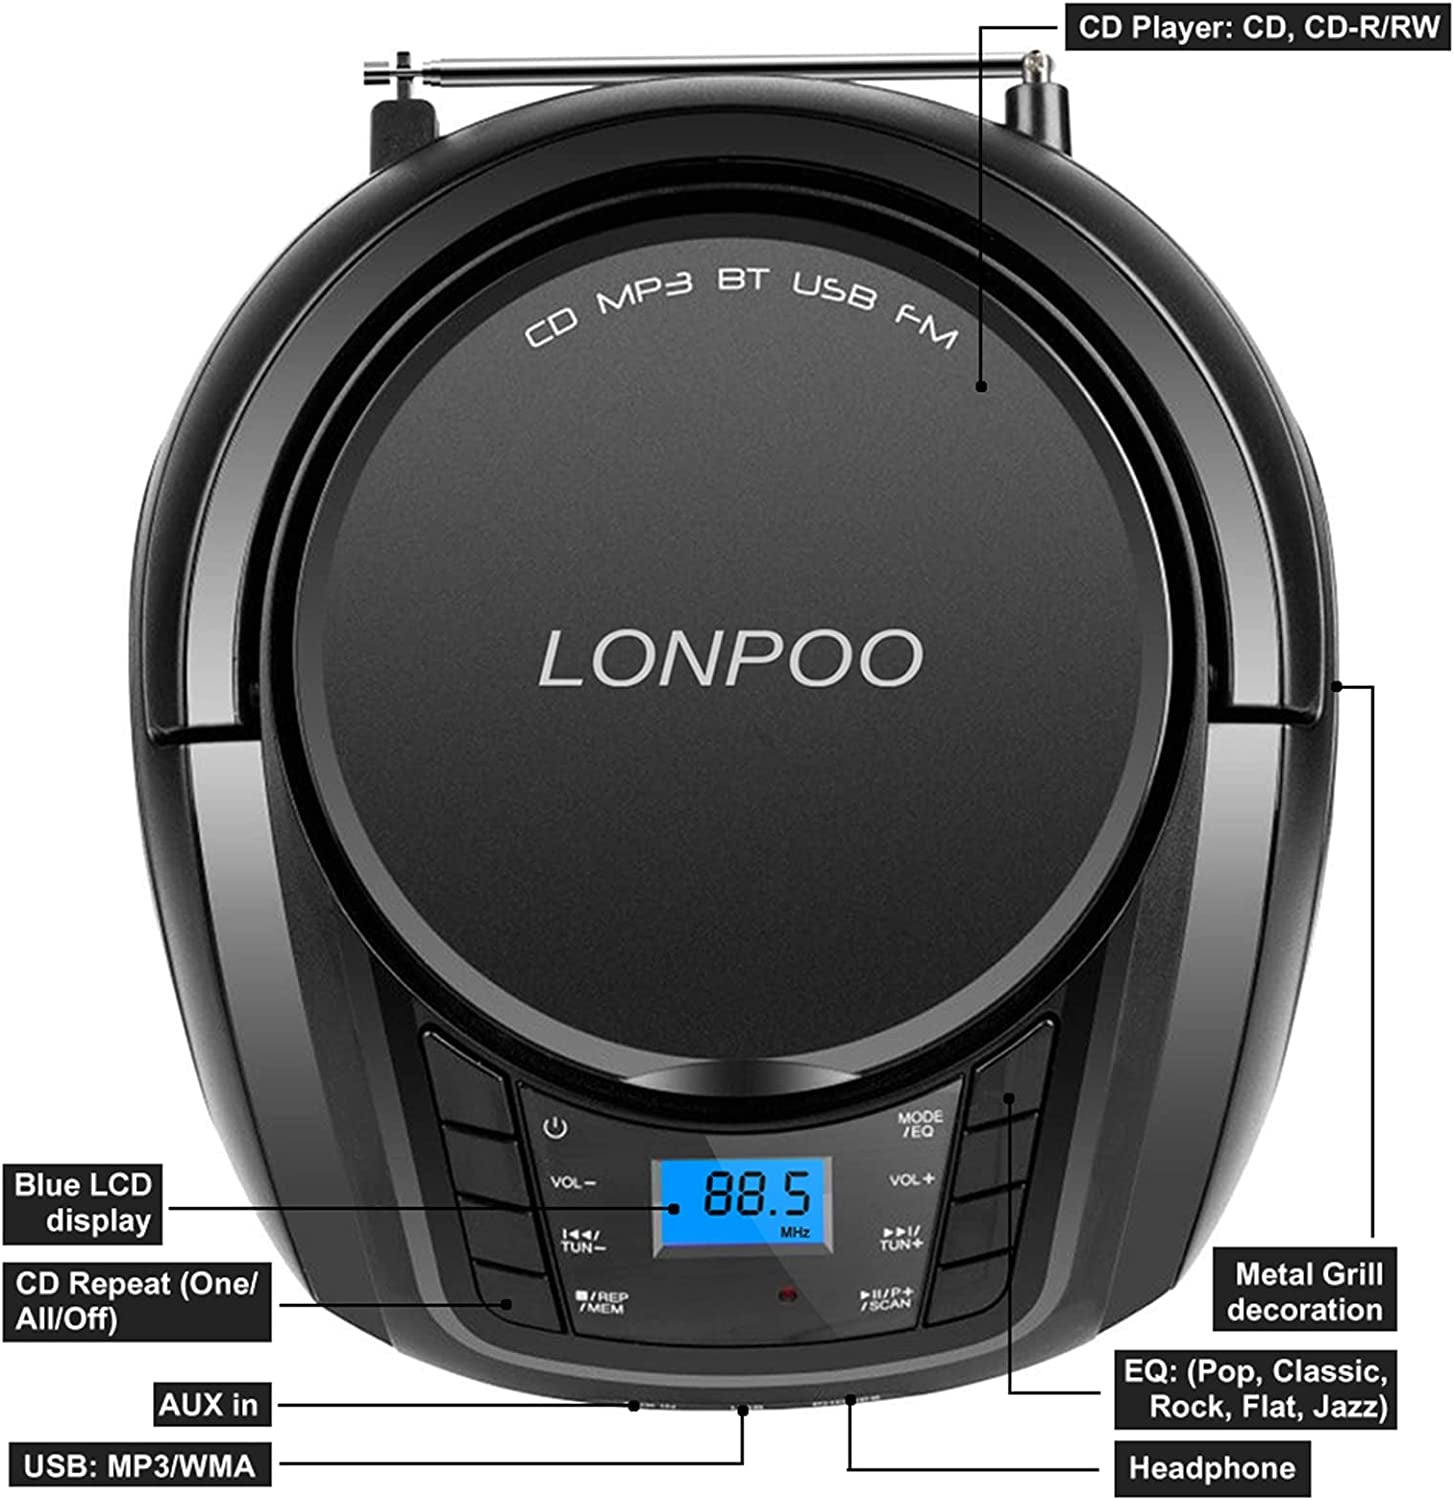 Portable Boombox Compact Disc Player with FM Radio, USB, Bluetooth, Aux Input, and Earphone Jack Output, Stereo Sound Speaker & Audio Player 